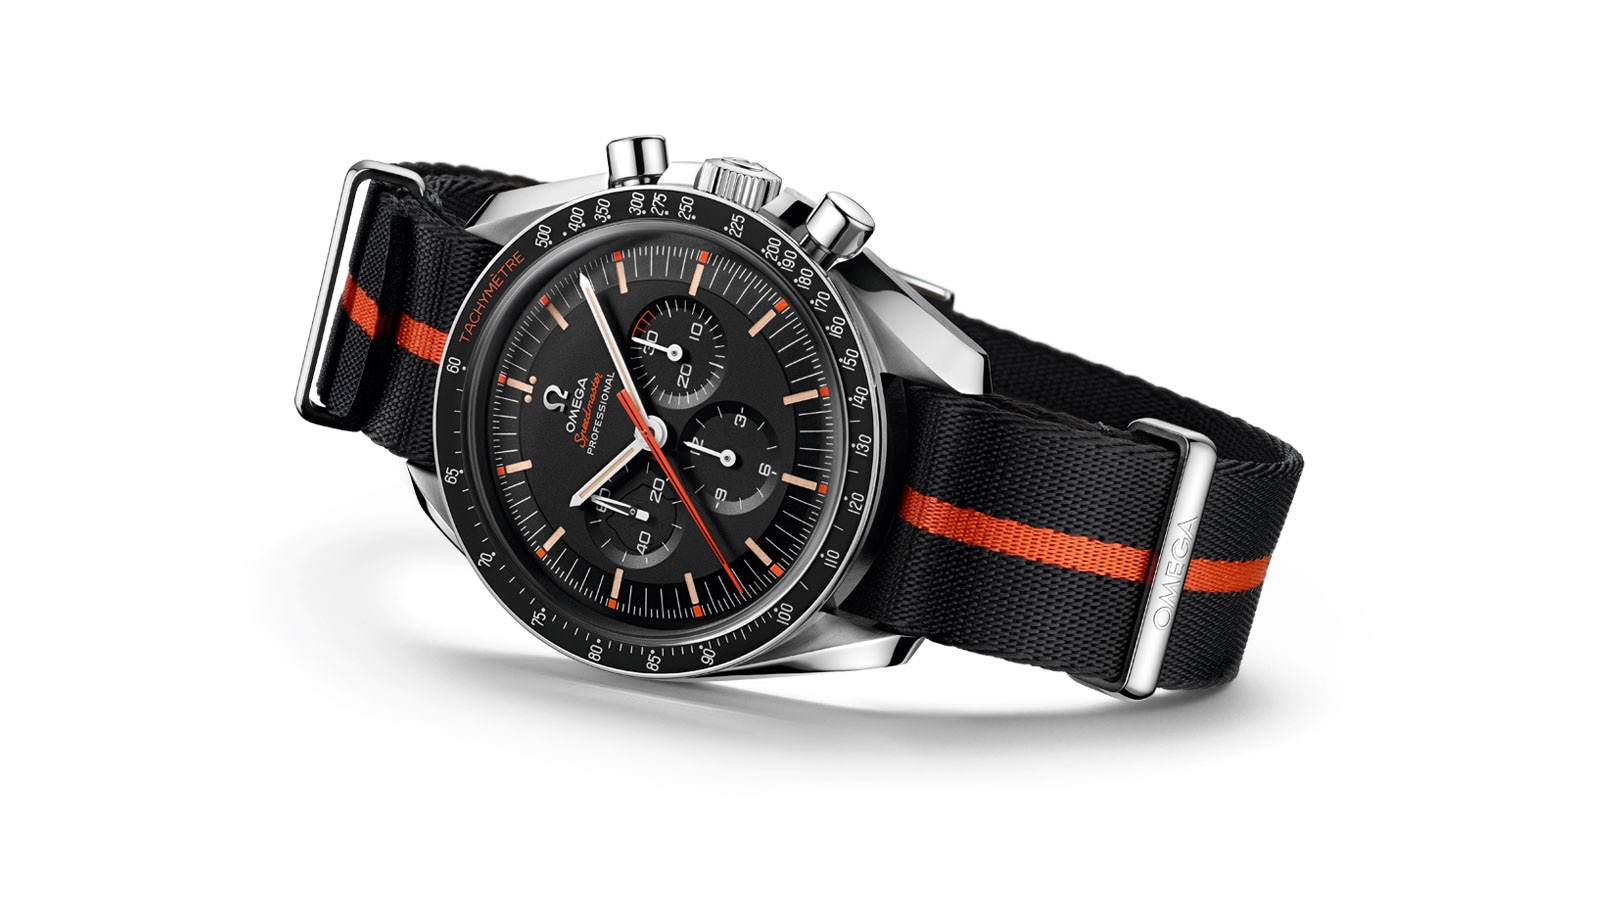 Omega Seamaster Diver 300m Co-Axial Master Chronometer Steel 42mm White Dial Tokyo 2020 Olympics